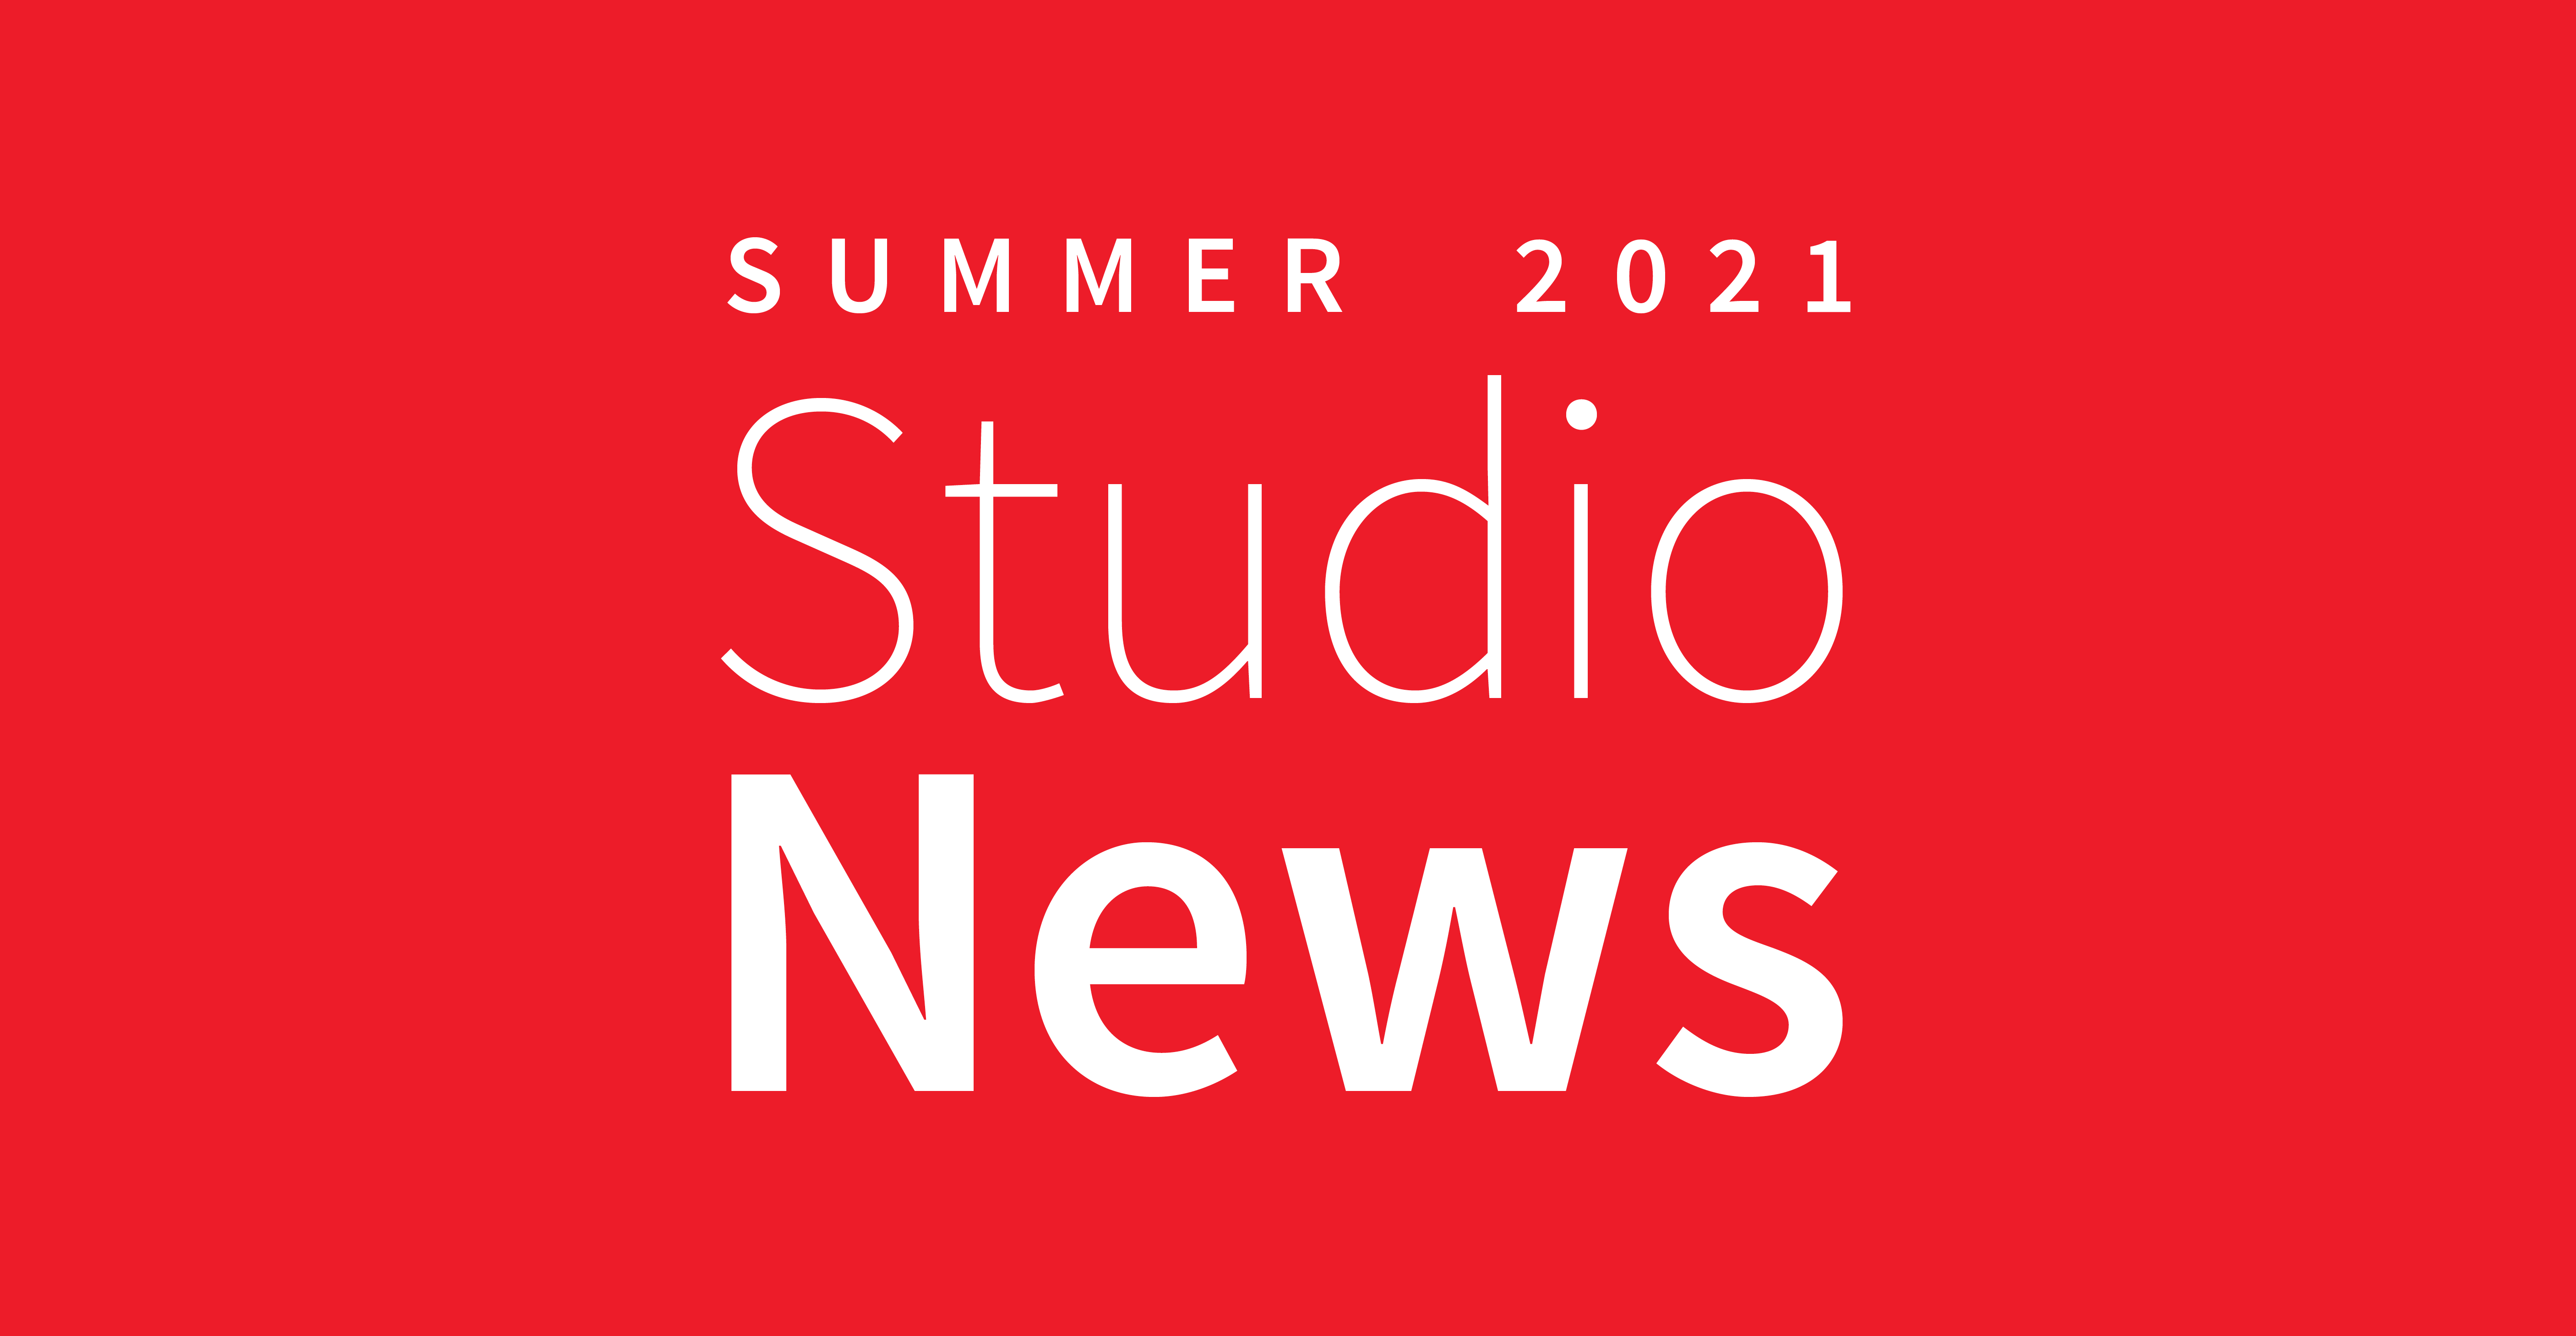 The New Edition of StudioNews is Here!